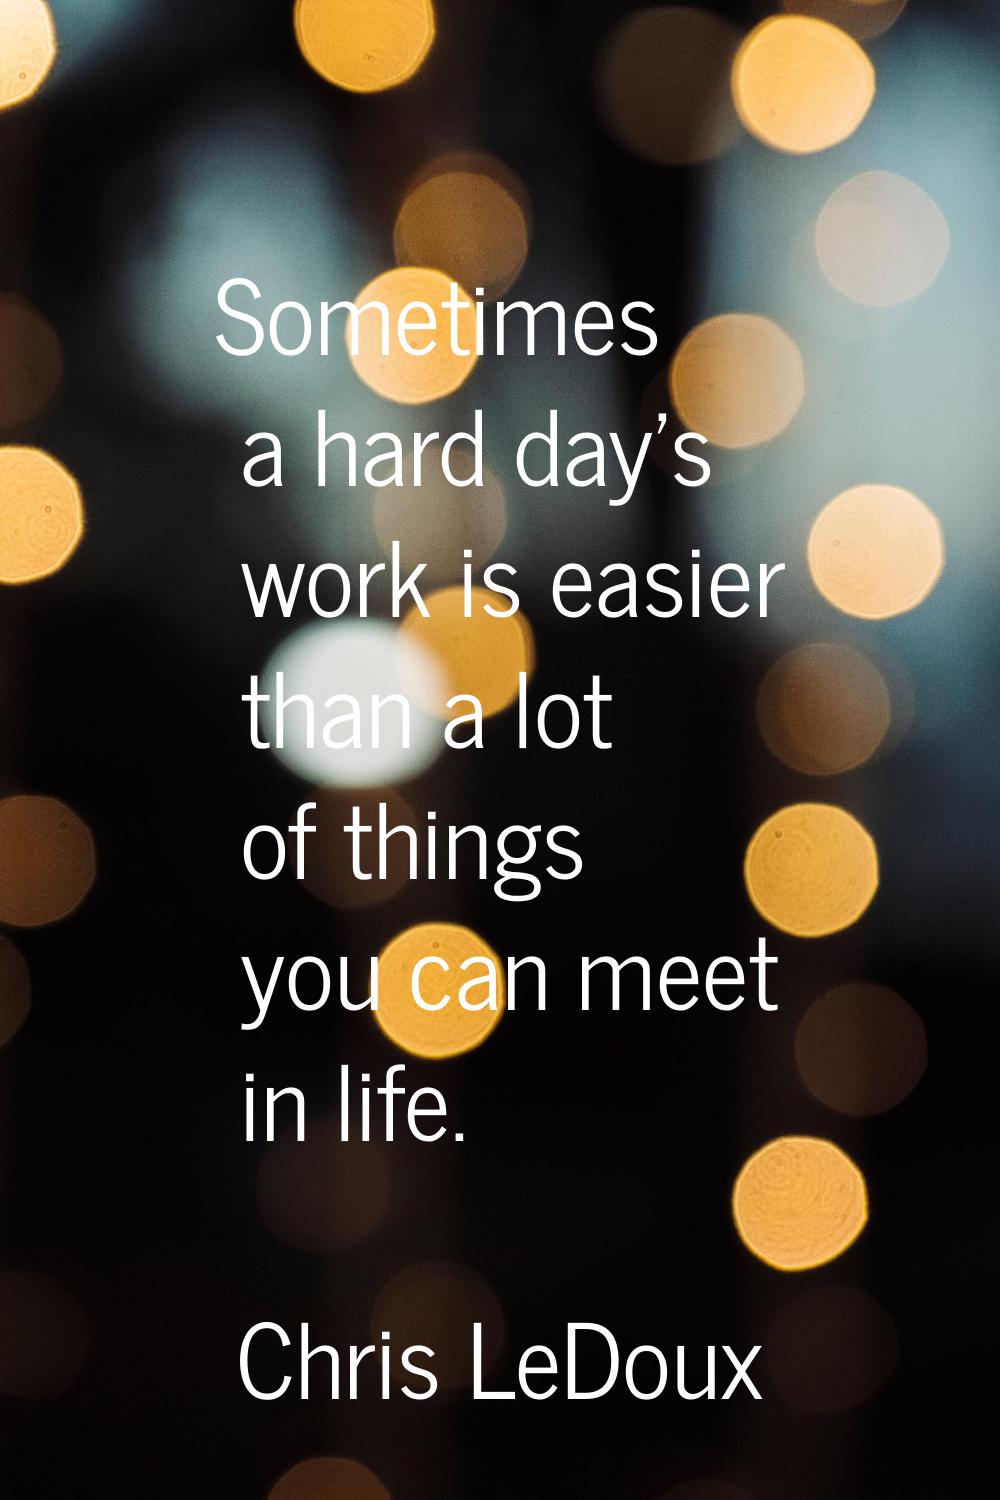 Sometimes a hard day's work is easier than a lot of things you can meet in life.